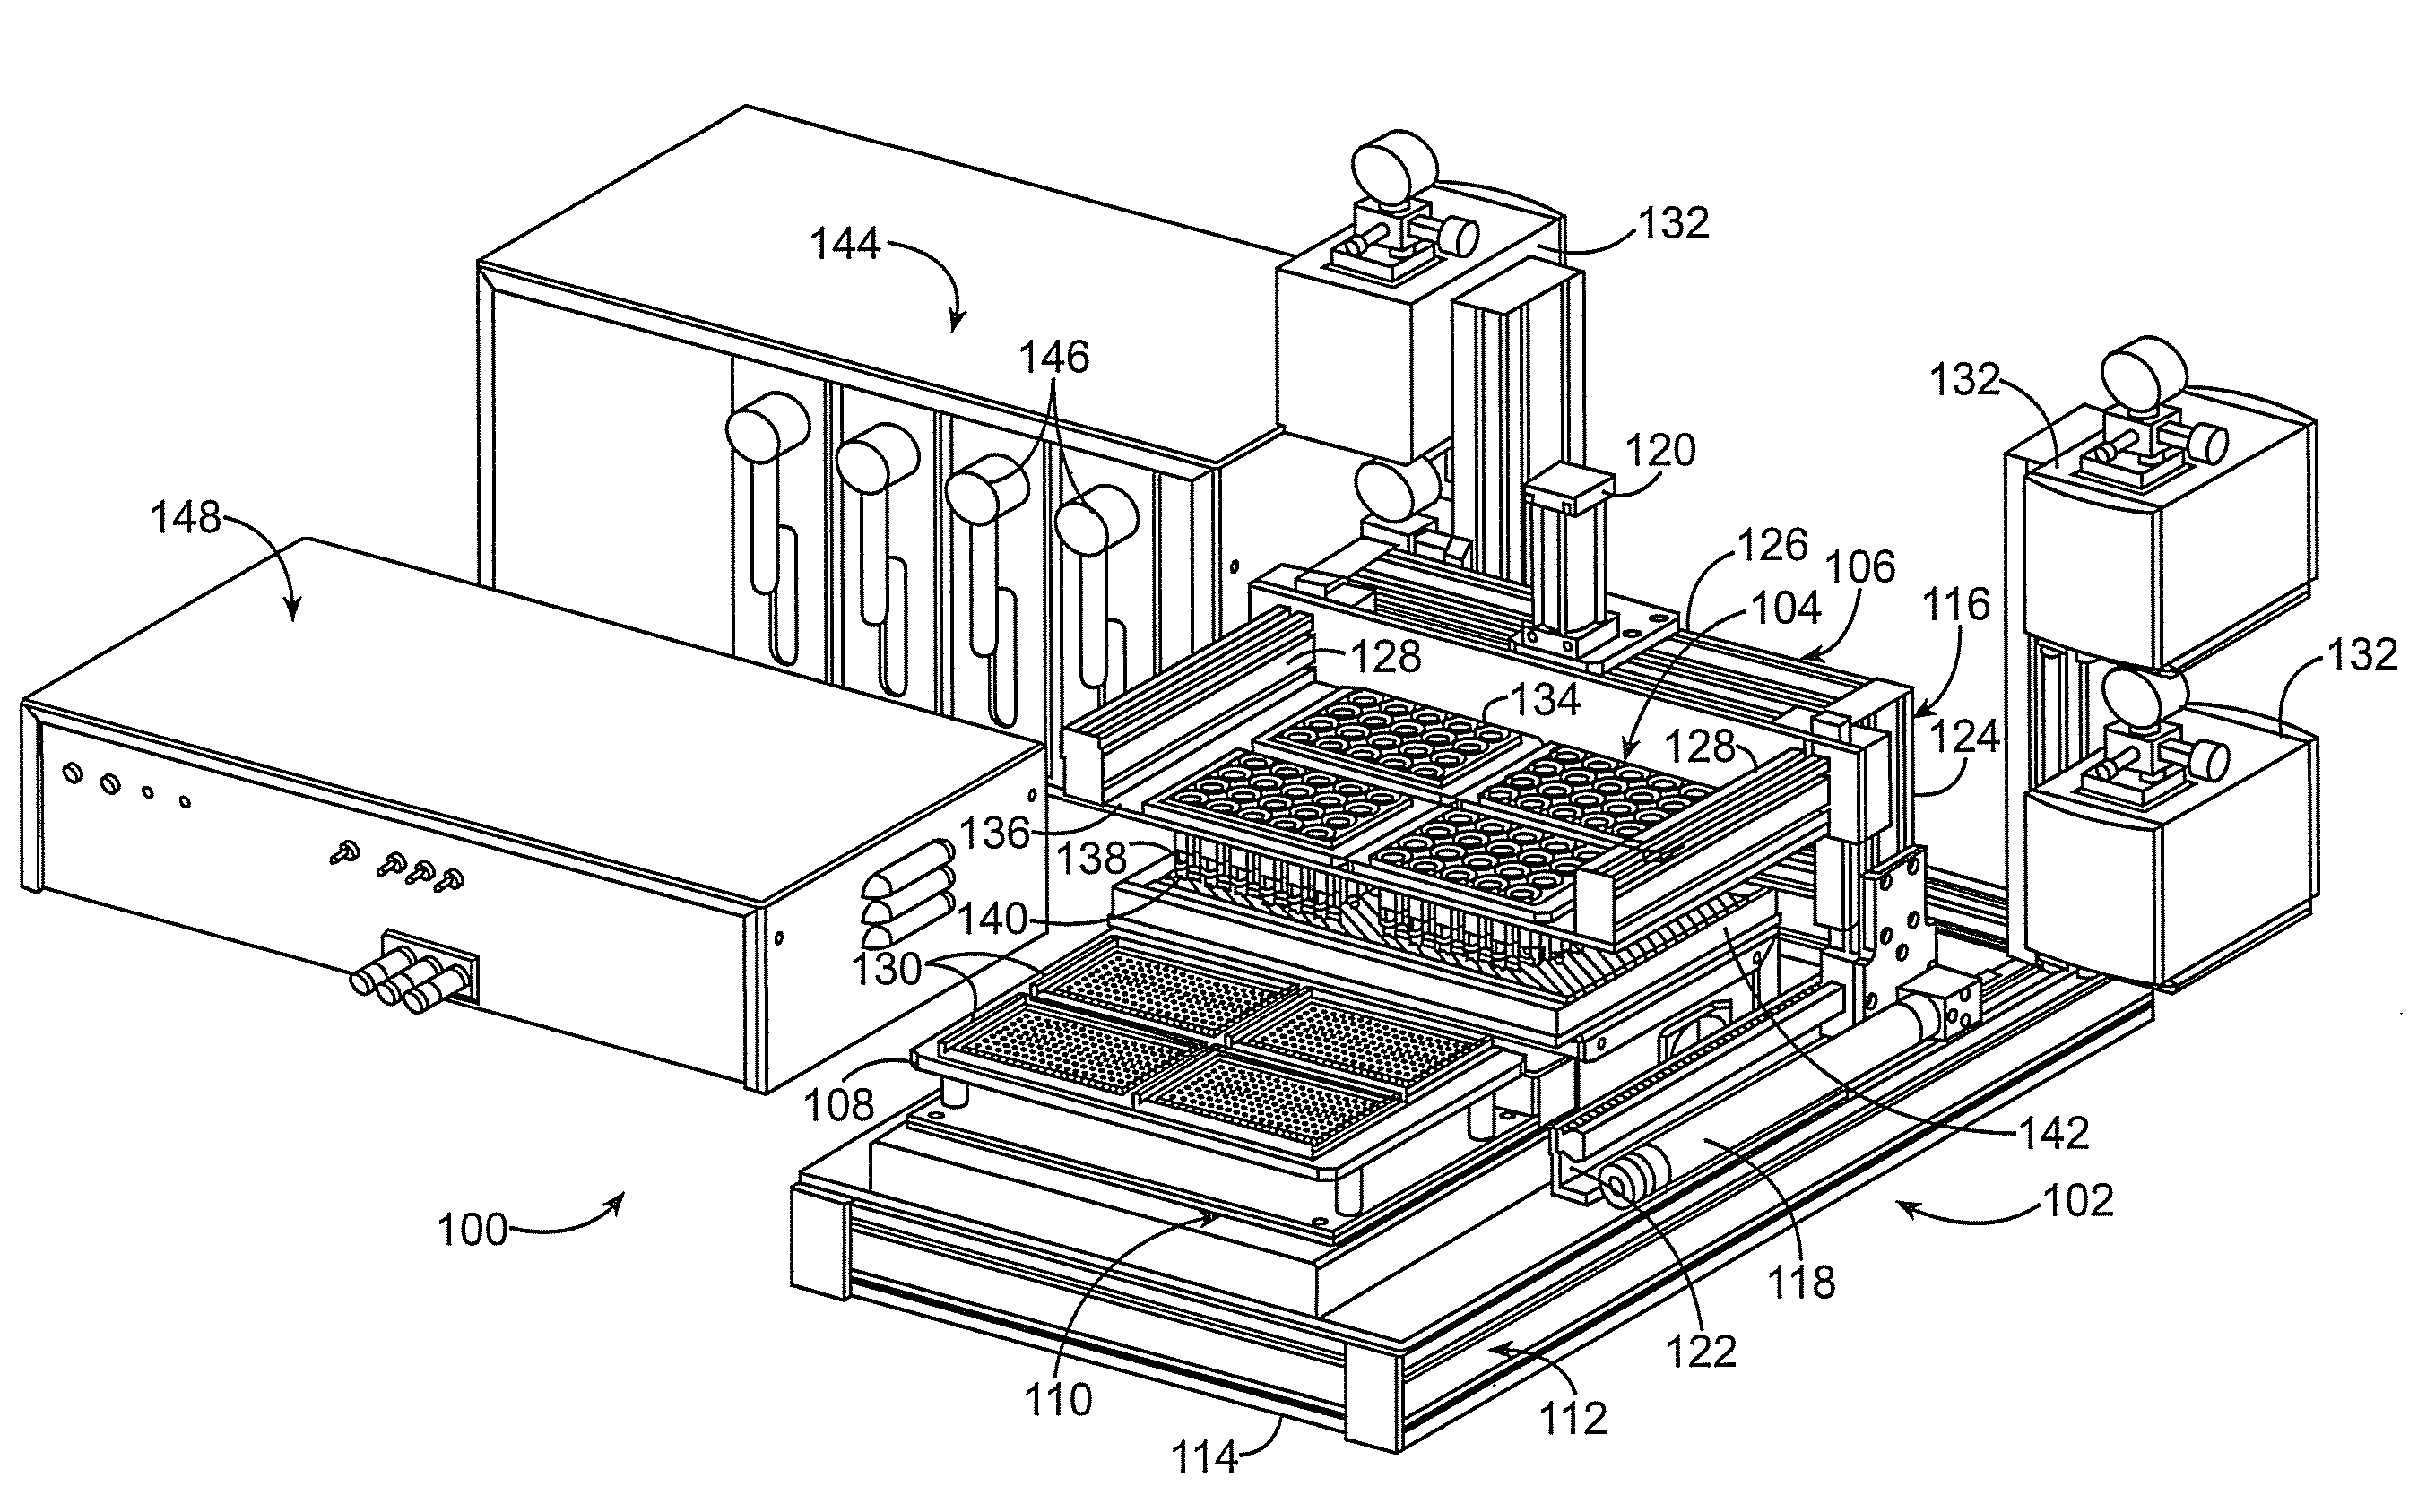 Scrub testing devices and methods